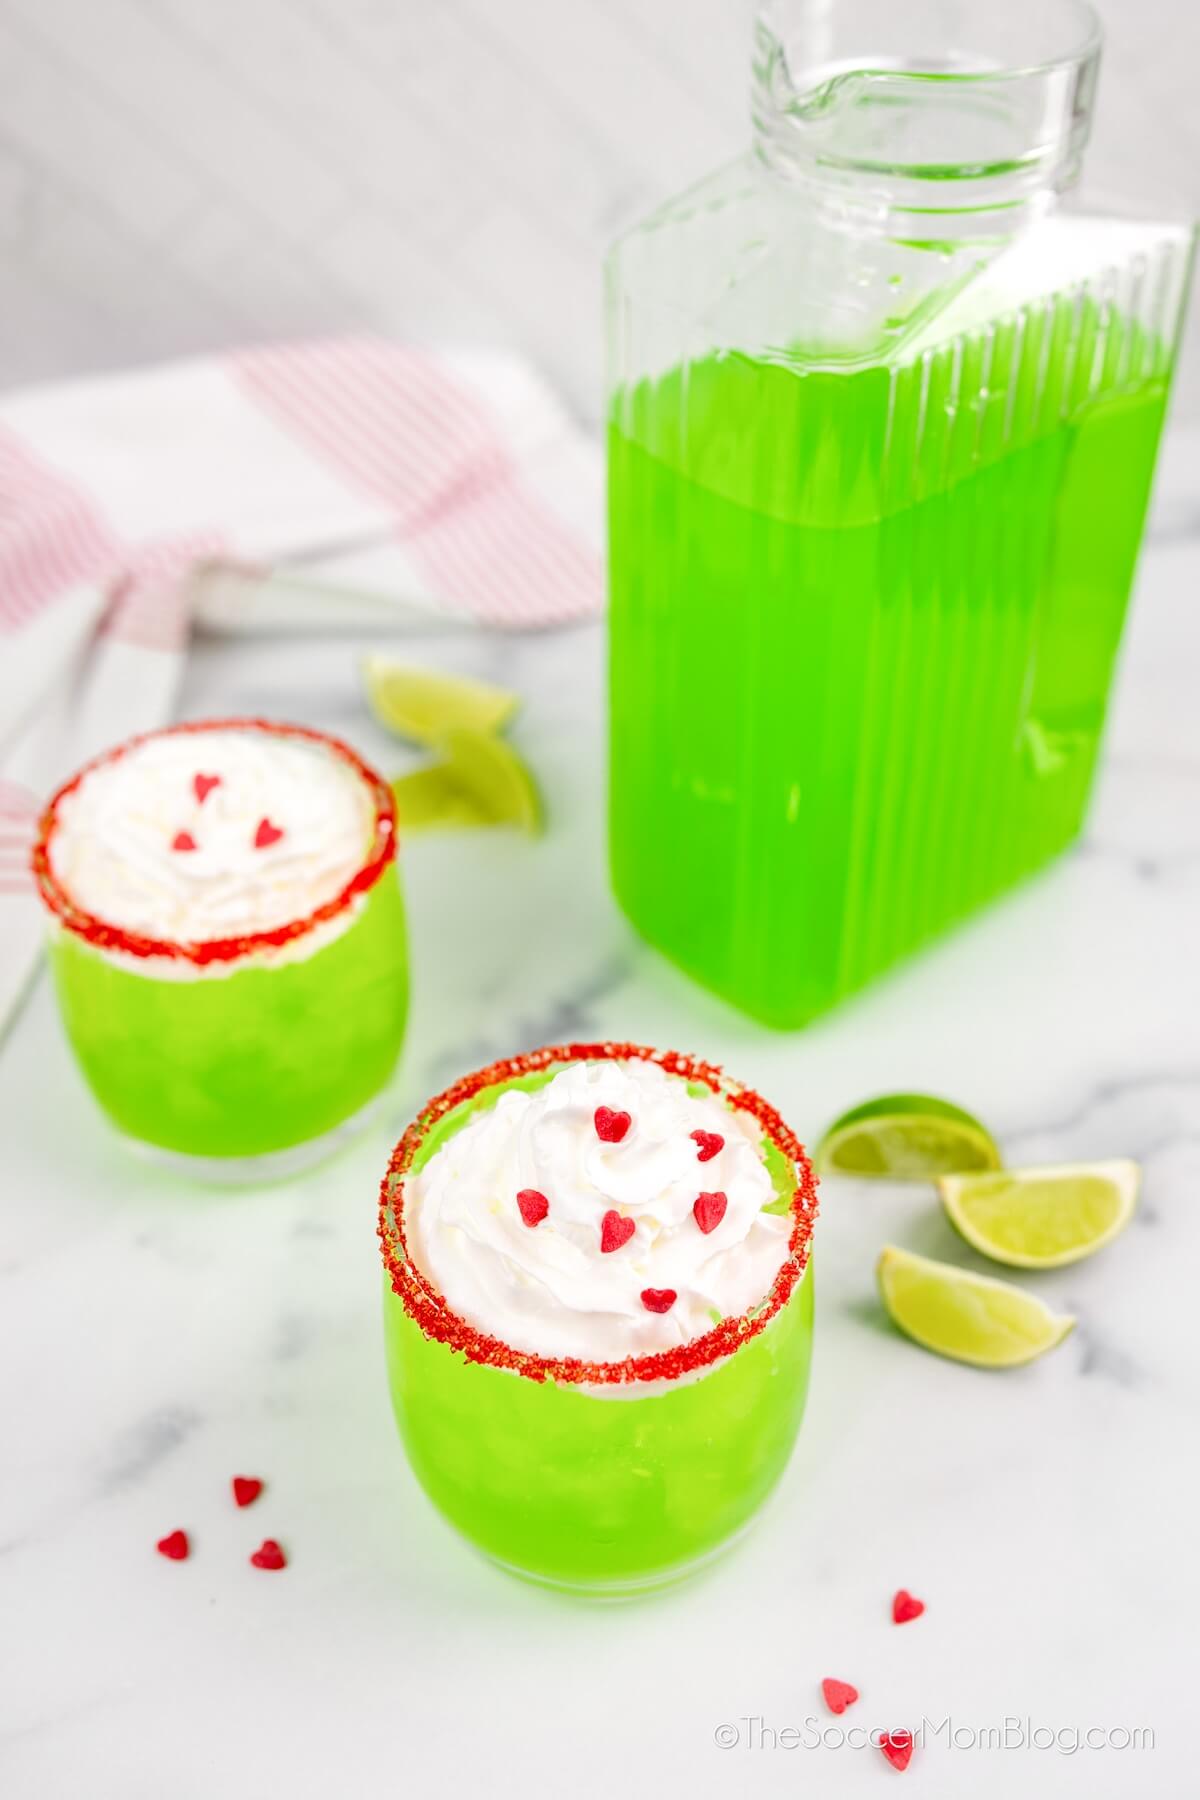 a full pitcher of lime green colored holiday punch, along with two individual glasses with whipped cream and sprinkles.